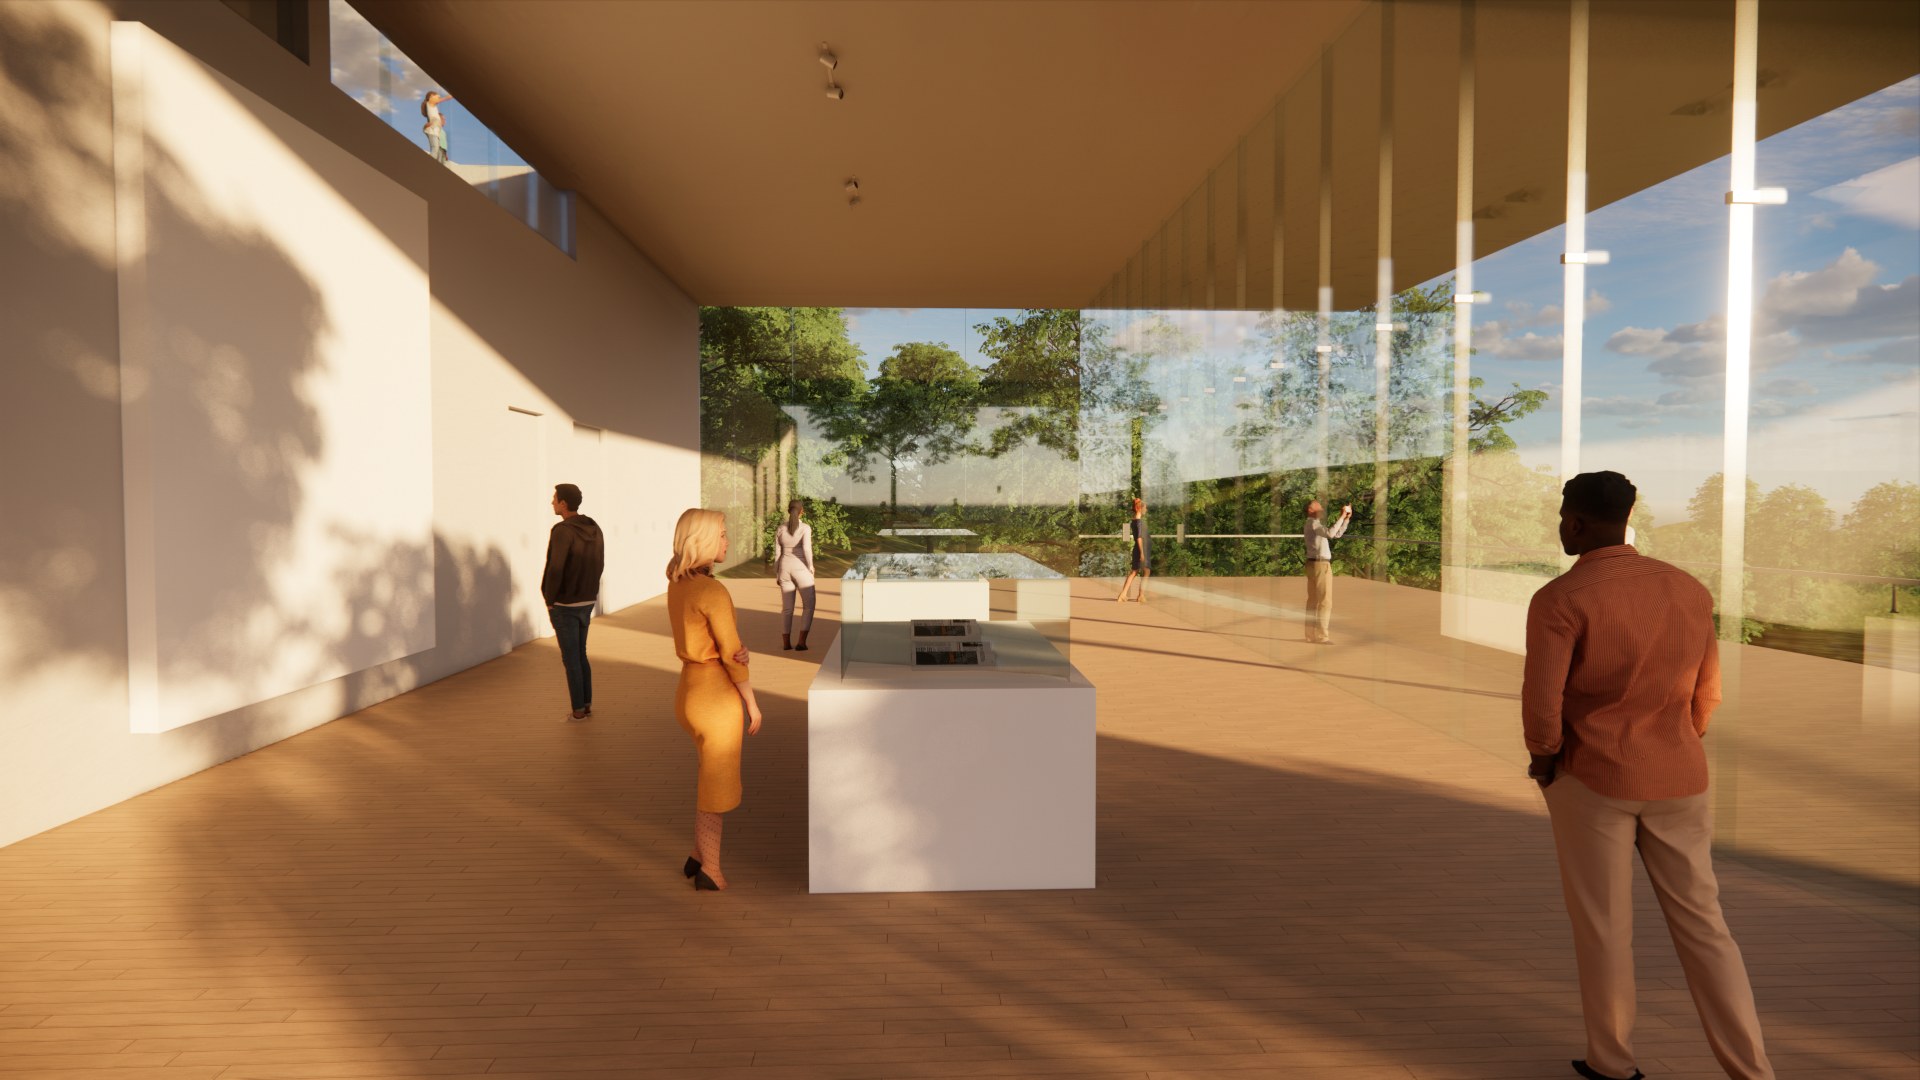 Interior digital perspective of a large gallery space with minimal furnishings and tall floor-to-ceiling windows on the back and right walls.